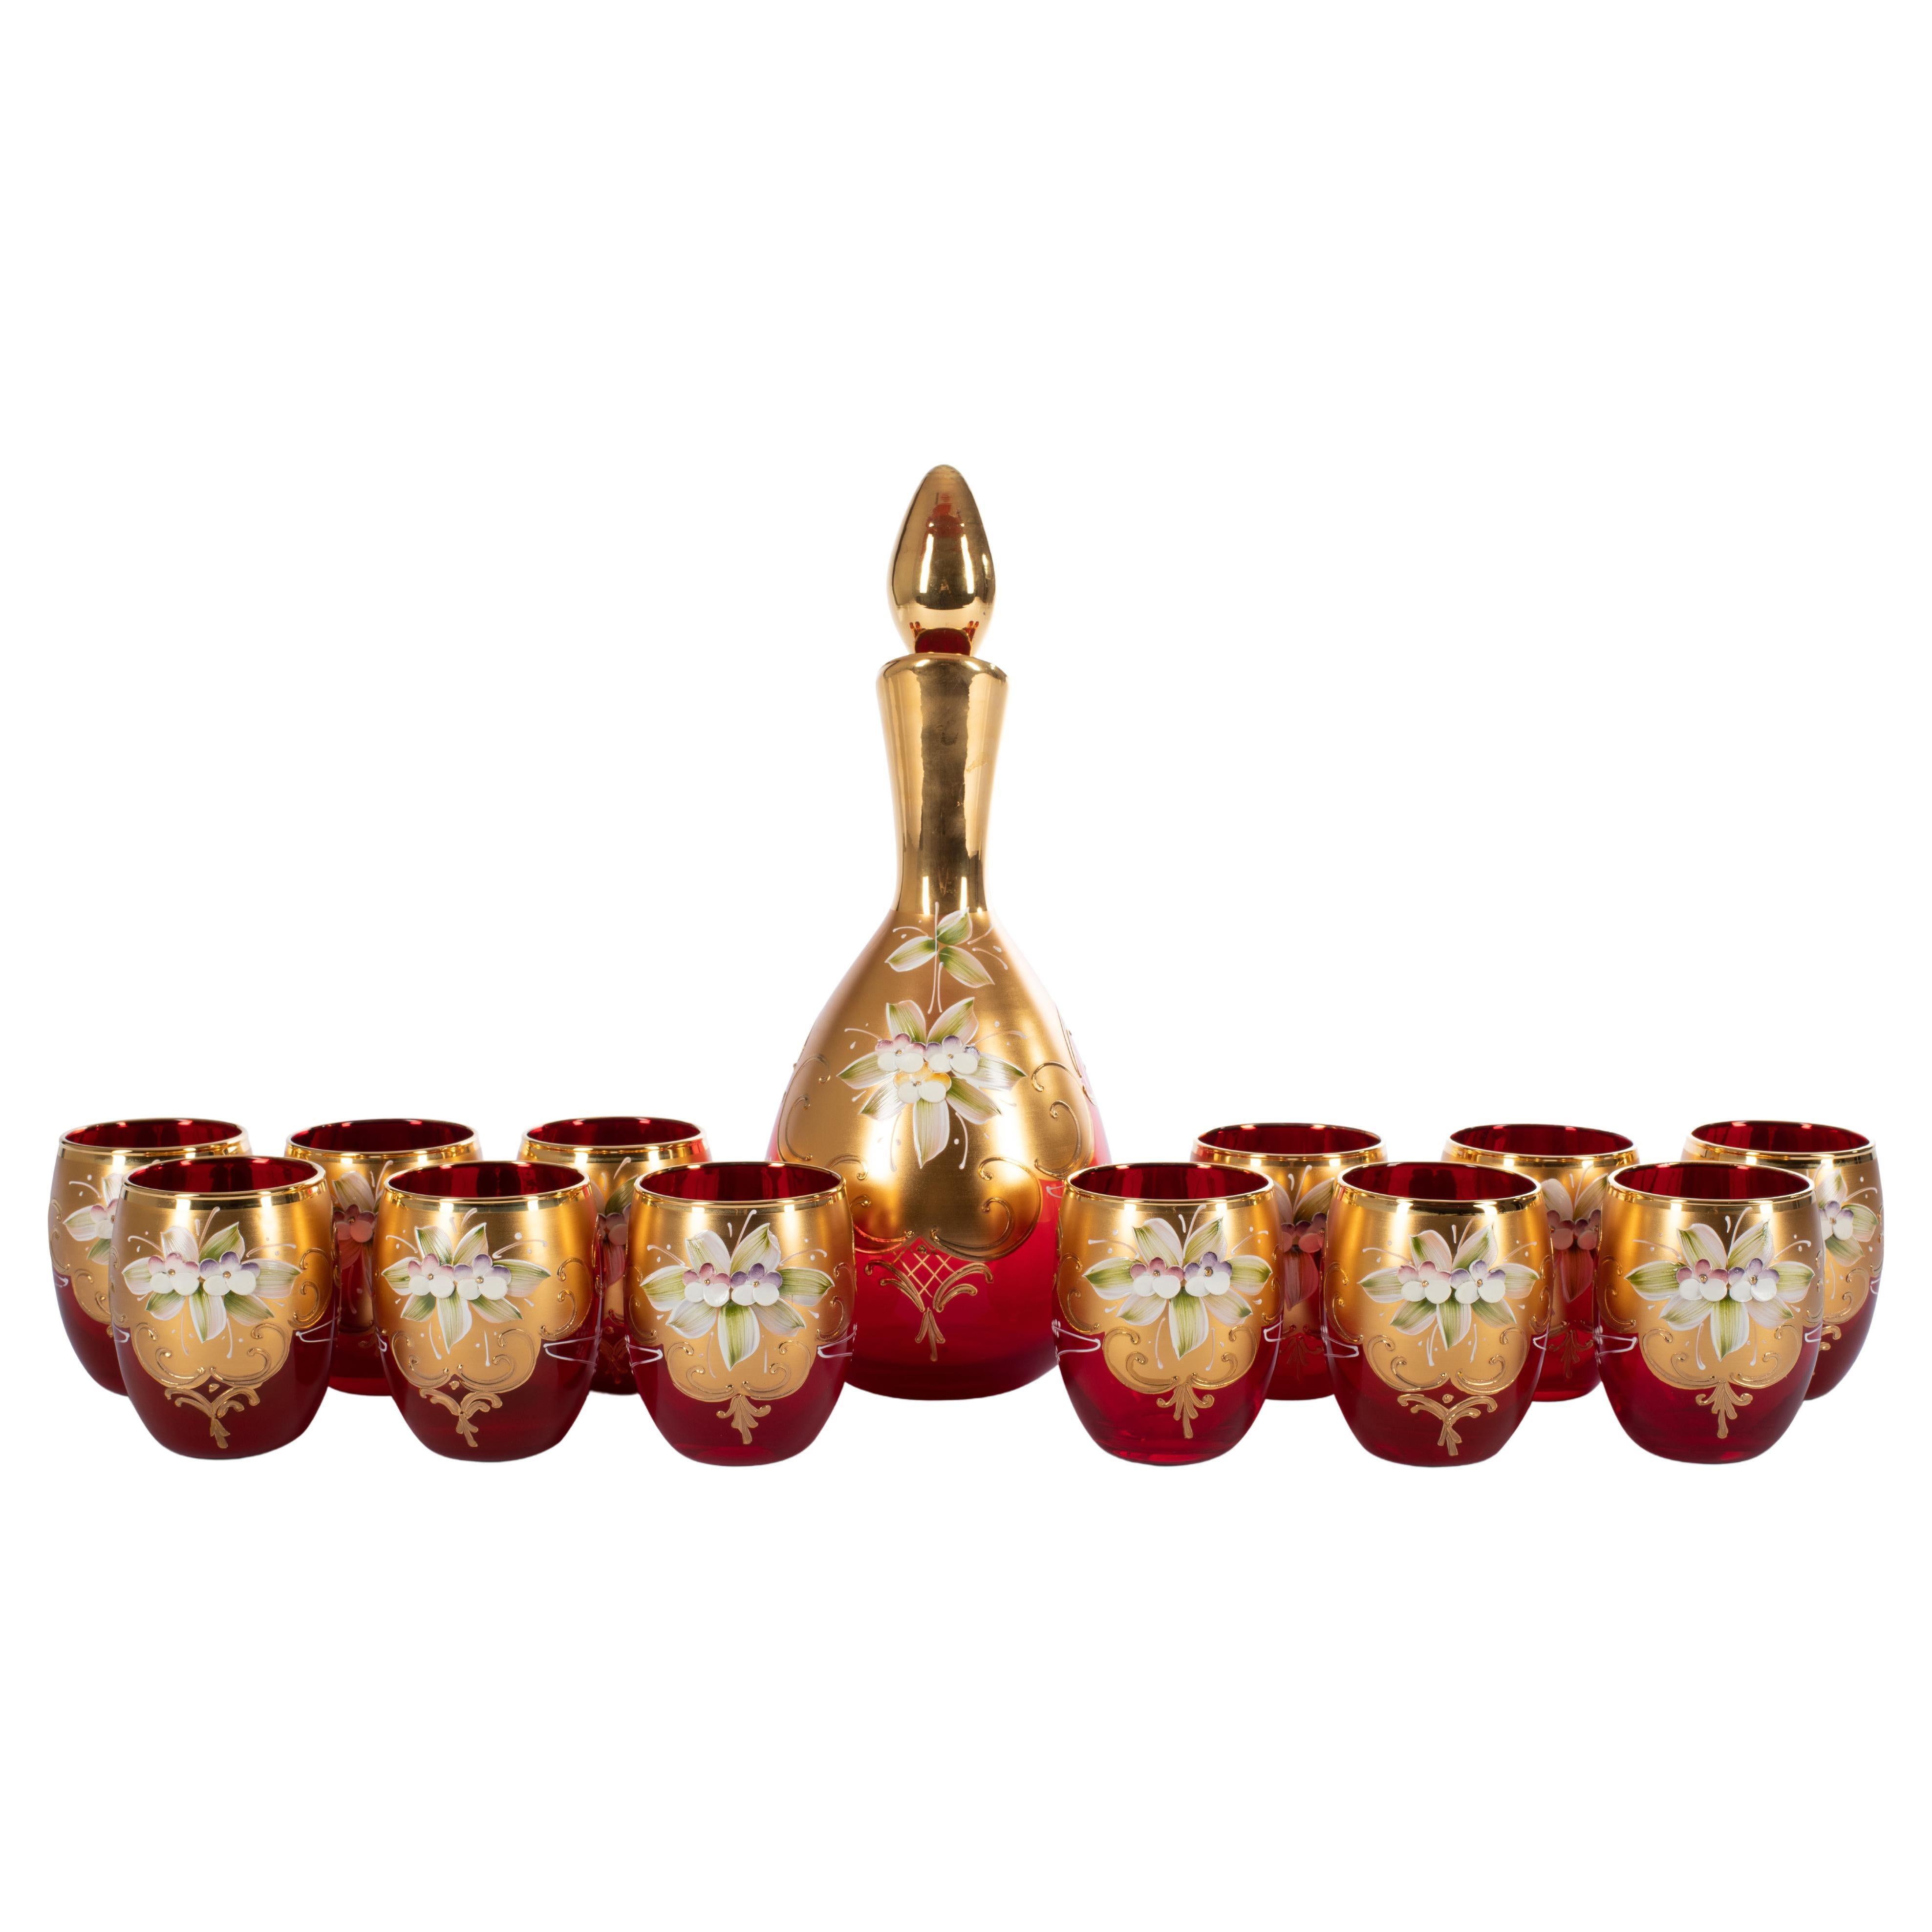 1295 Murano is proposing this beautiful hand made TRE FUOCHI Collection of 
12 tumblers 
2 bottles,
Venice hand blown ruby red glass, and hand made Fire Enamel decors on a 24kt gold hand made decors.
Fully hand made in Venice, Murano, Italy.
These